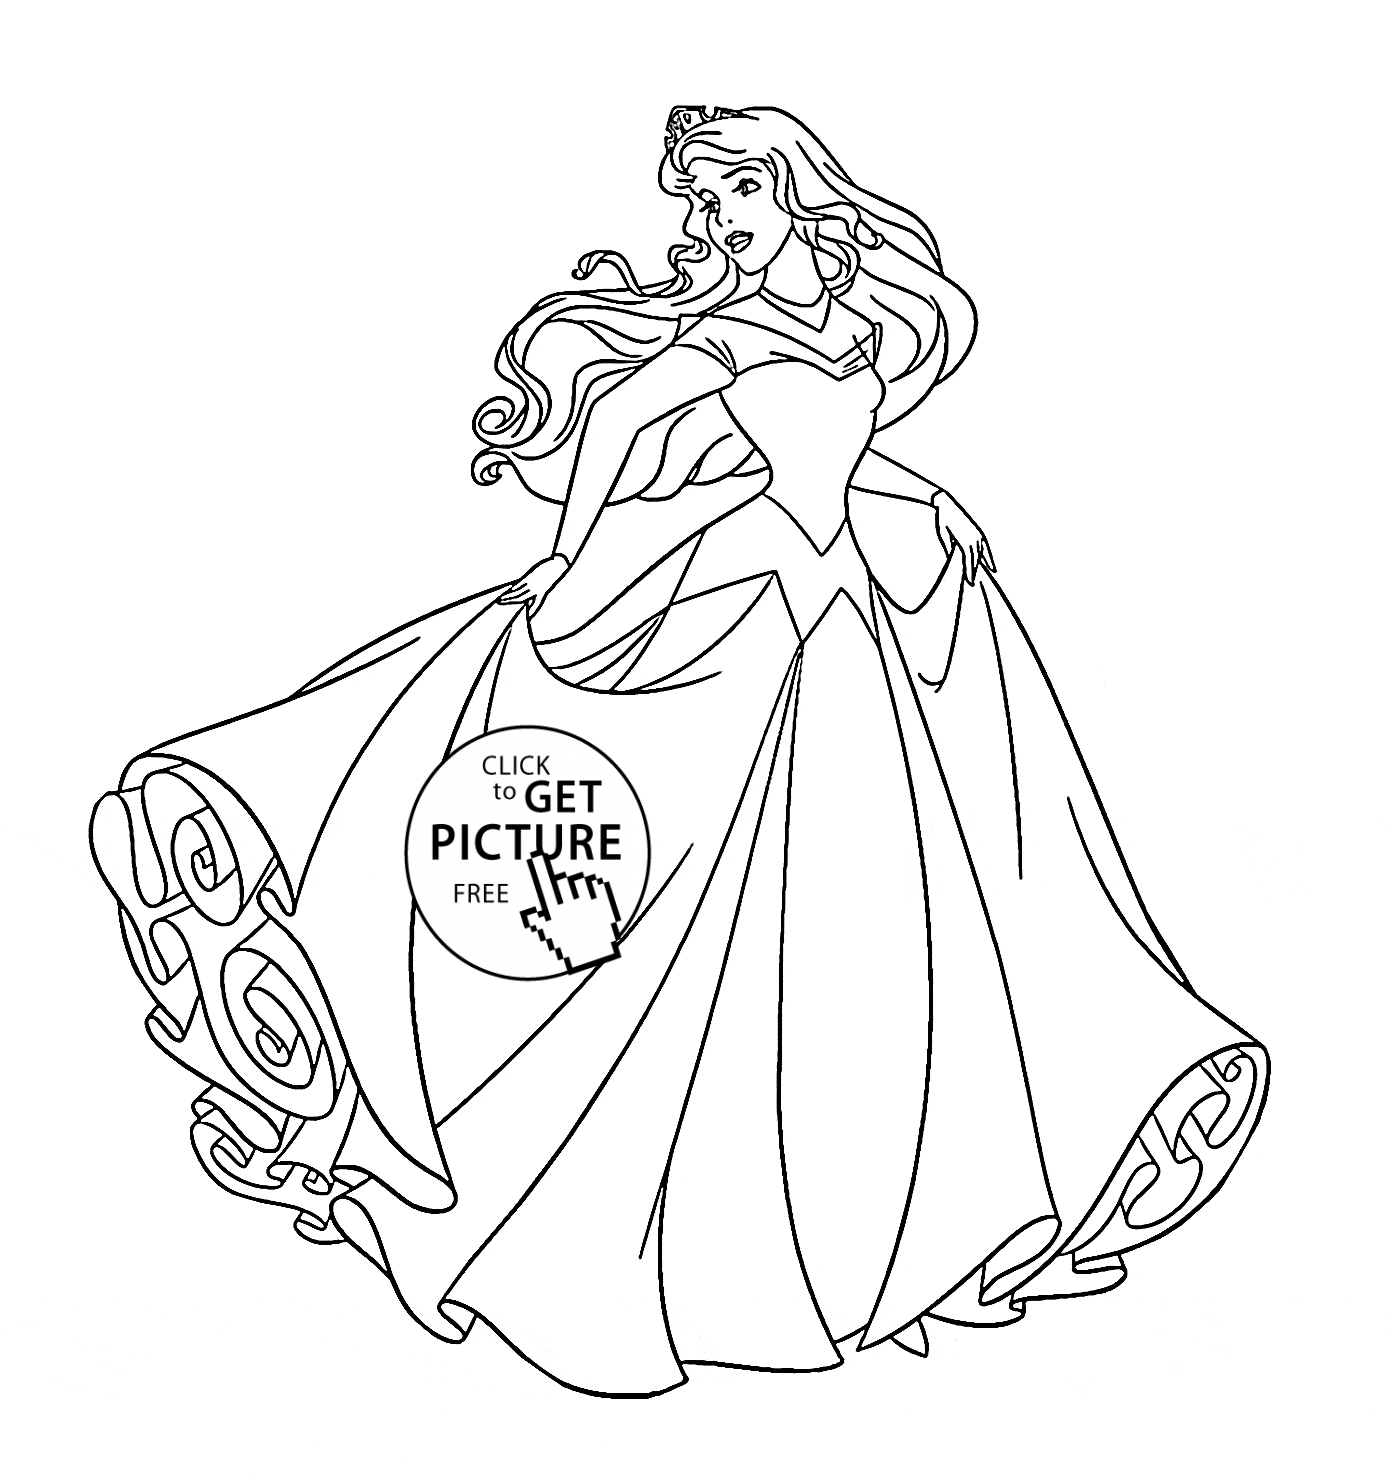 Dancing Coloring Pages Coloring Pages Disney Coloring Pages Free Princess Aurora Dancing